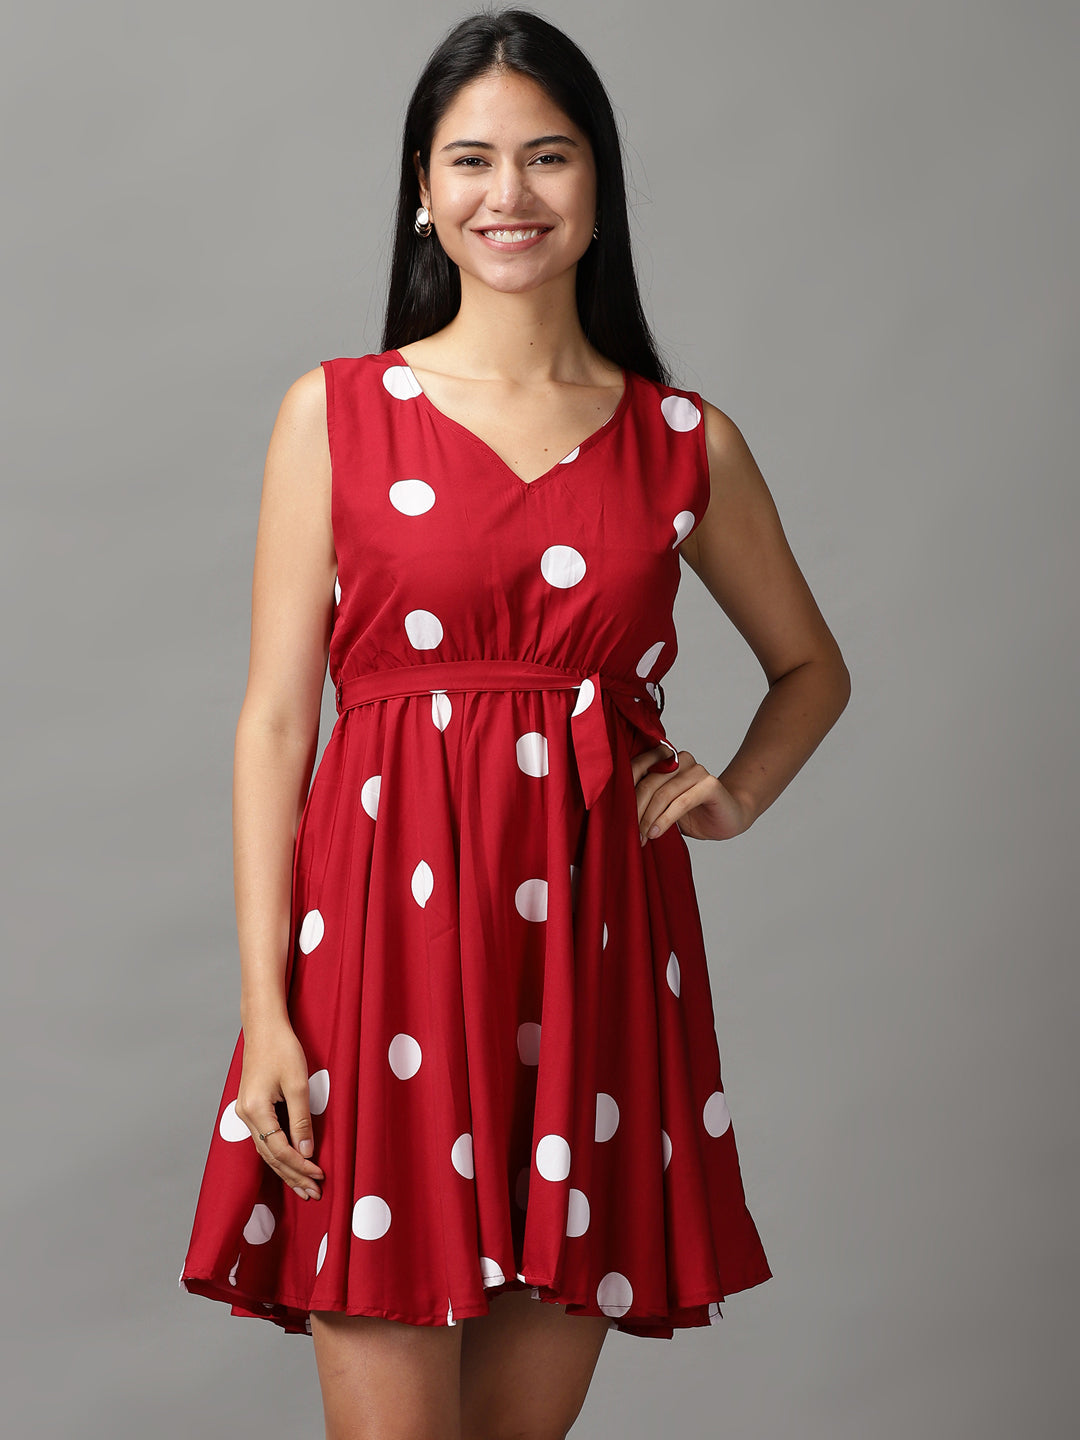 Women's Red Polka Dots Fit and Flare Dress